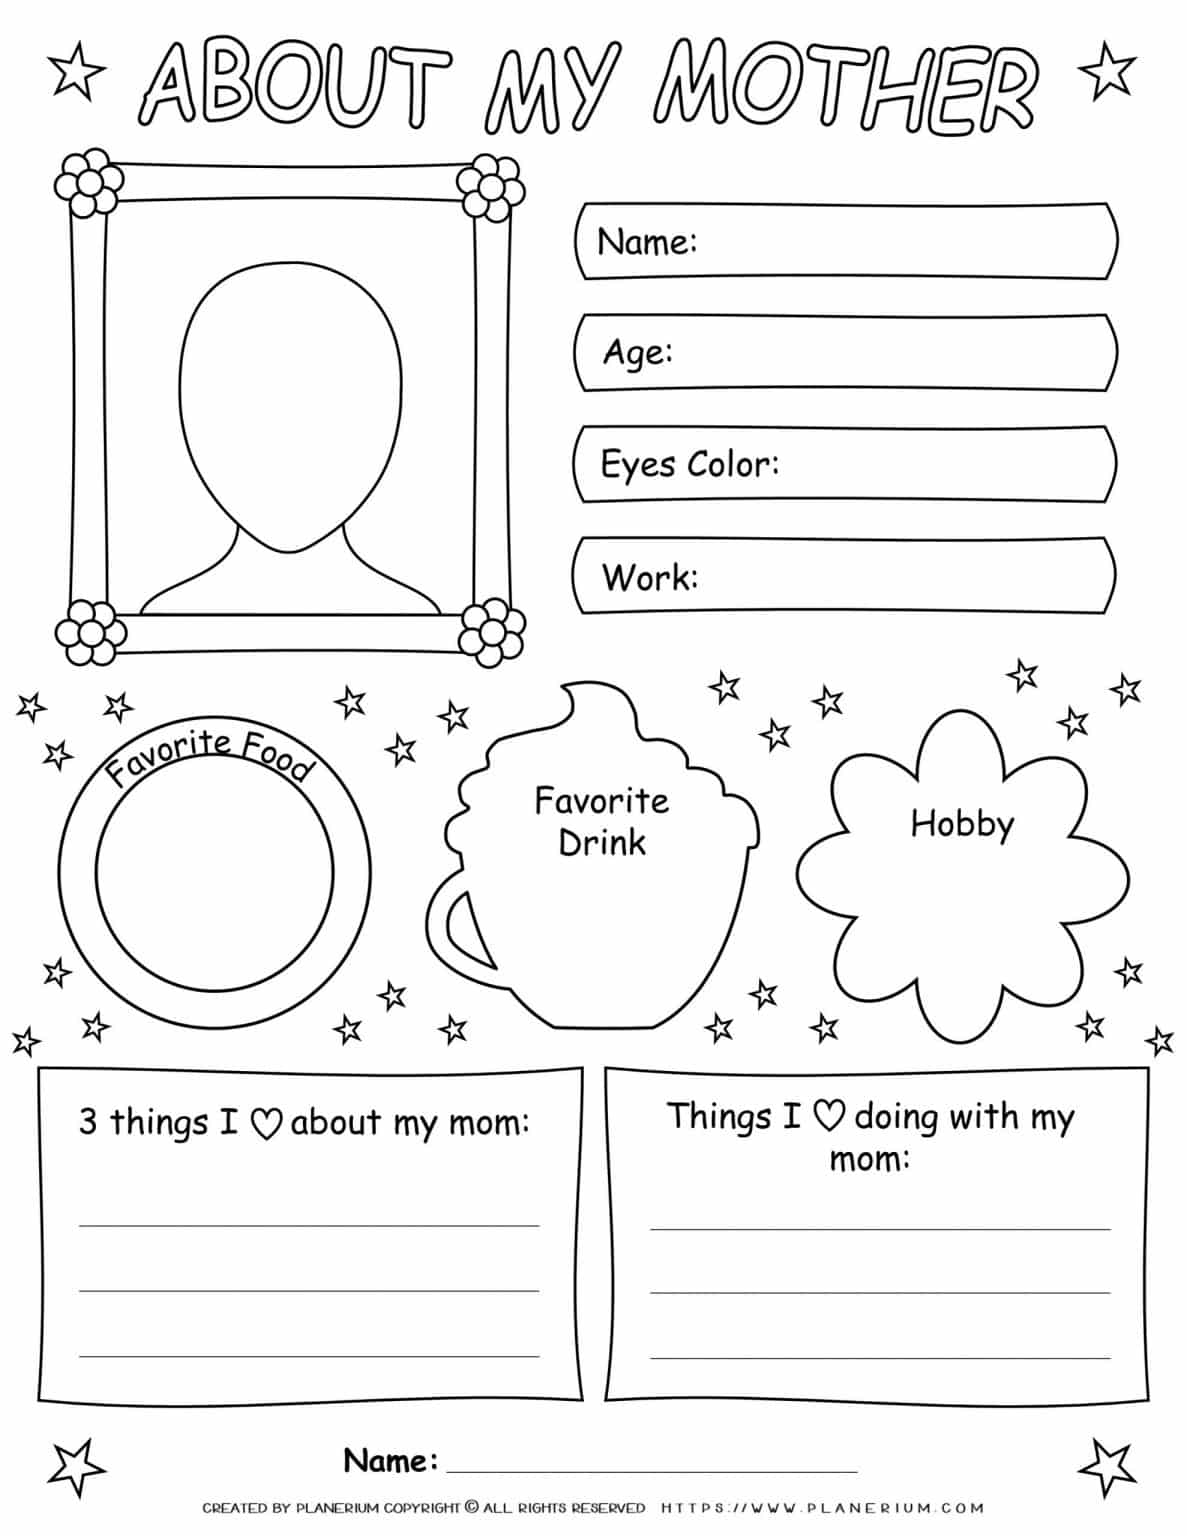 mother-s-day-worksheet-about-my-mother-planerium